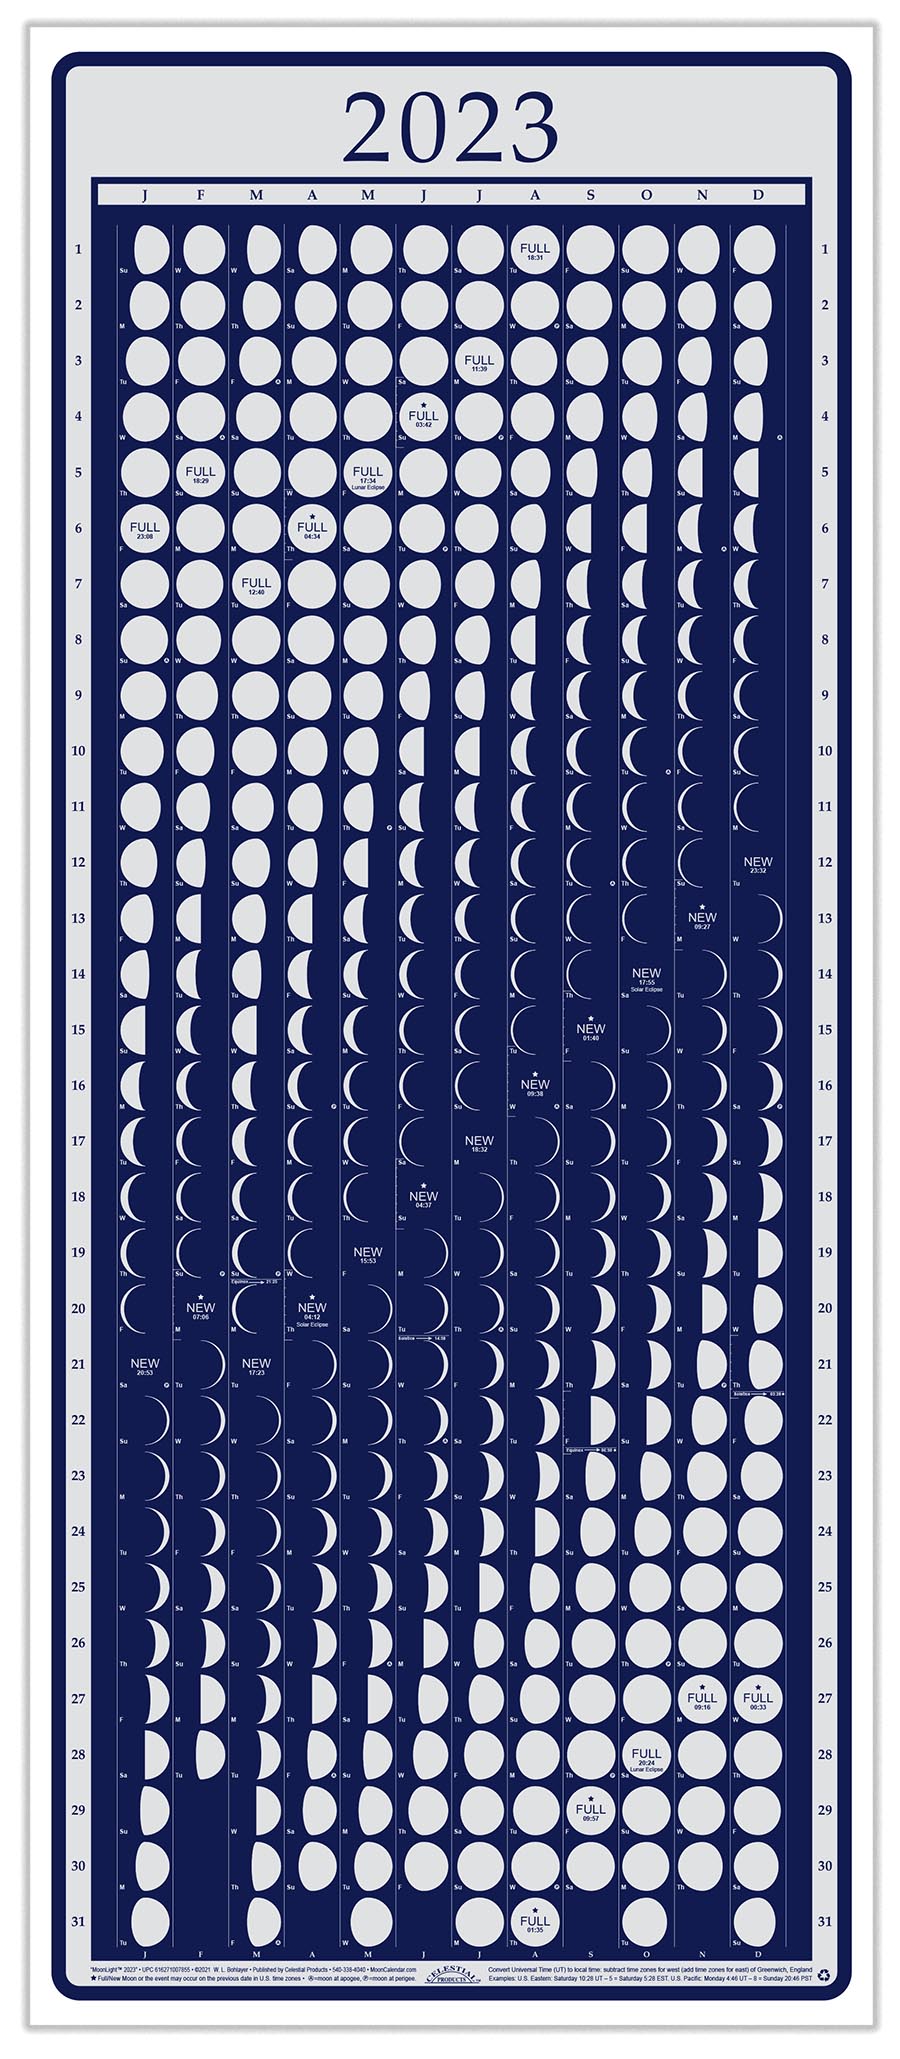 moon-phases-2023-calendar-customize-and-print